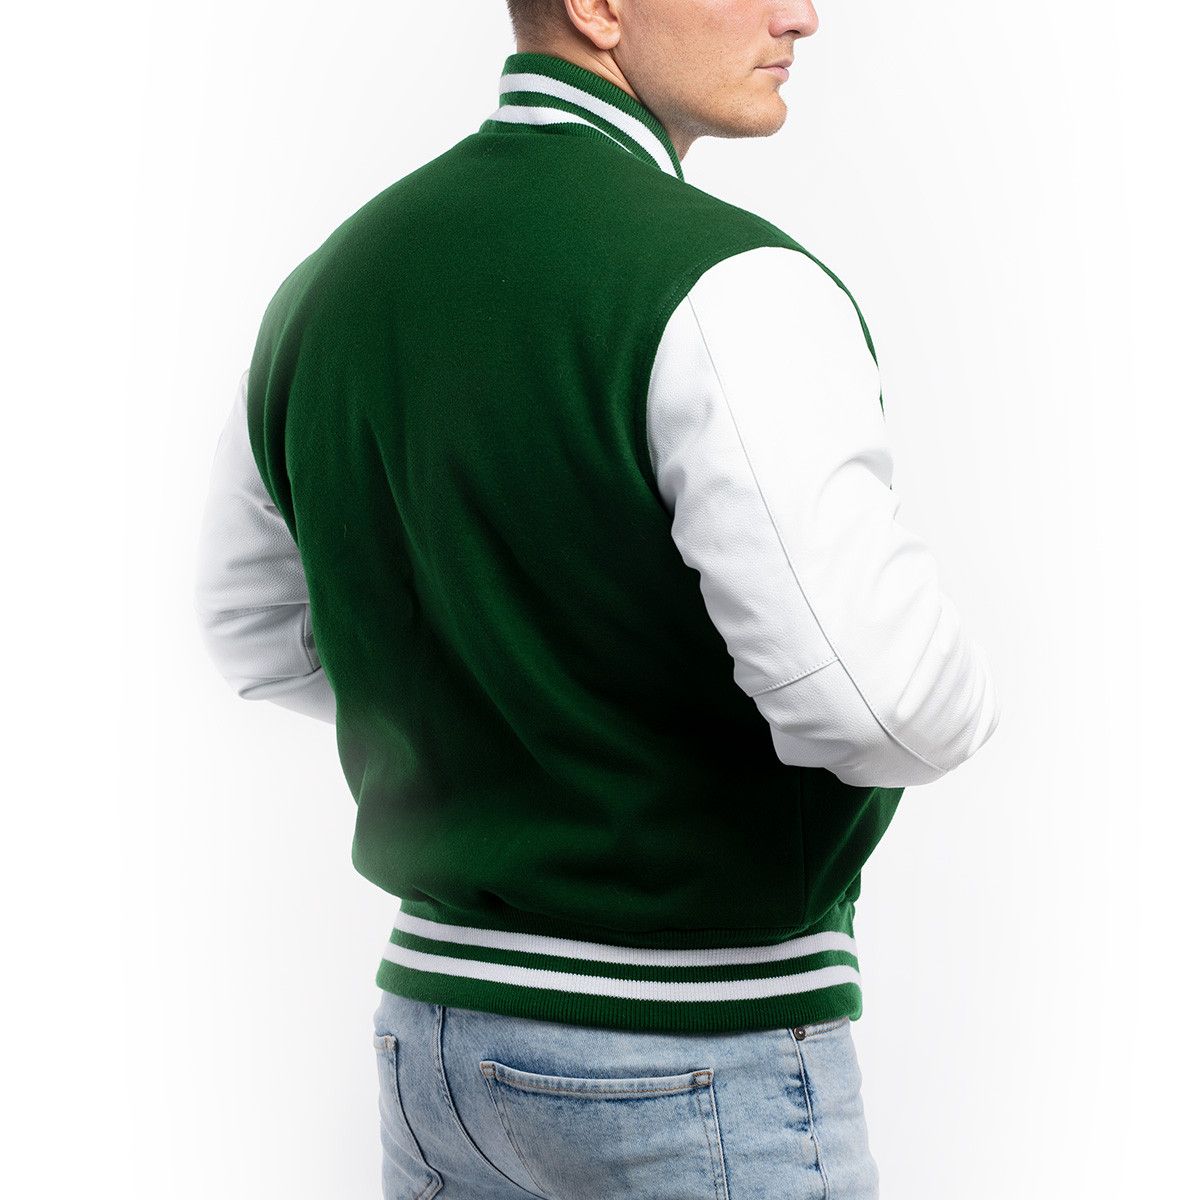 Kelly Green Letterman Jacket with Black Leather Sleeves